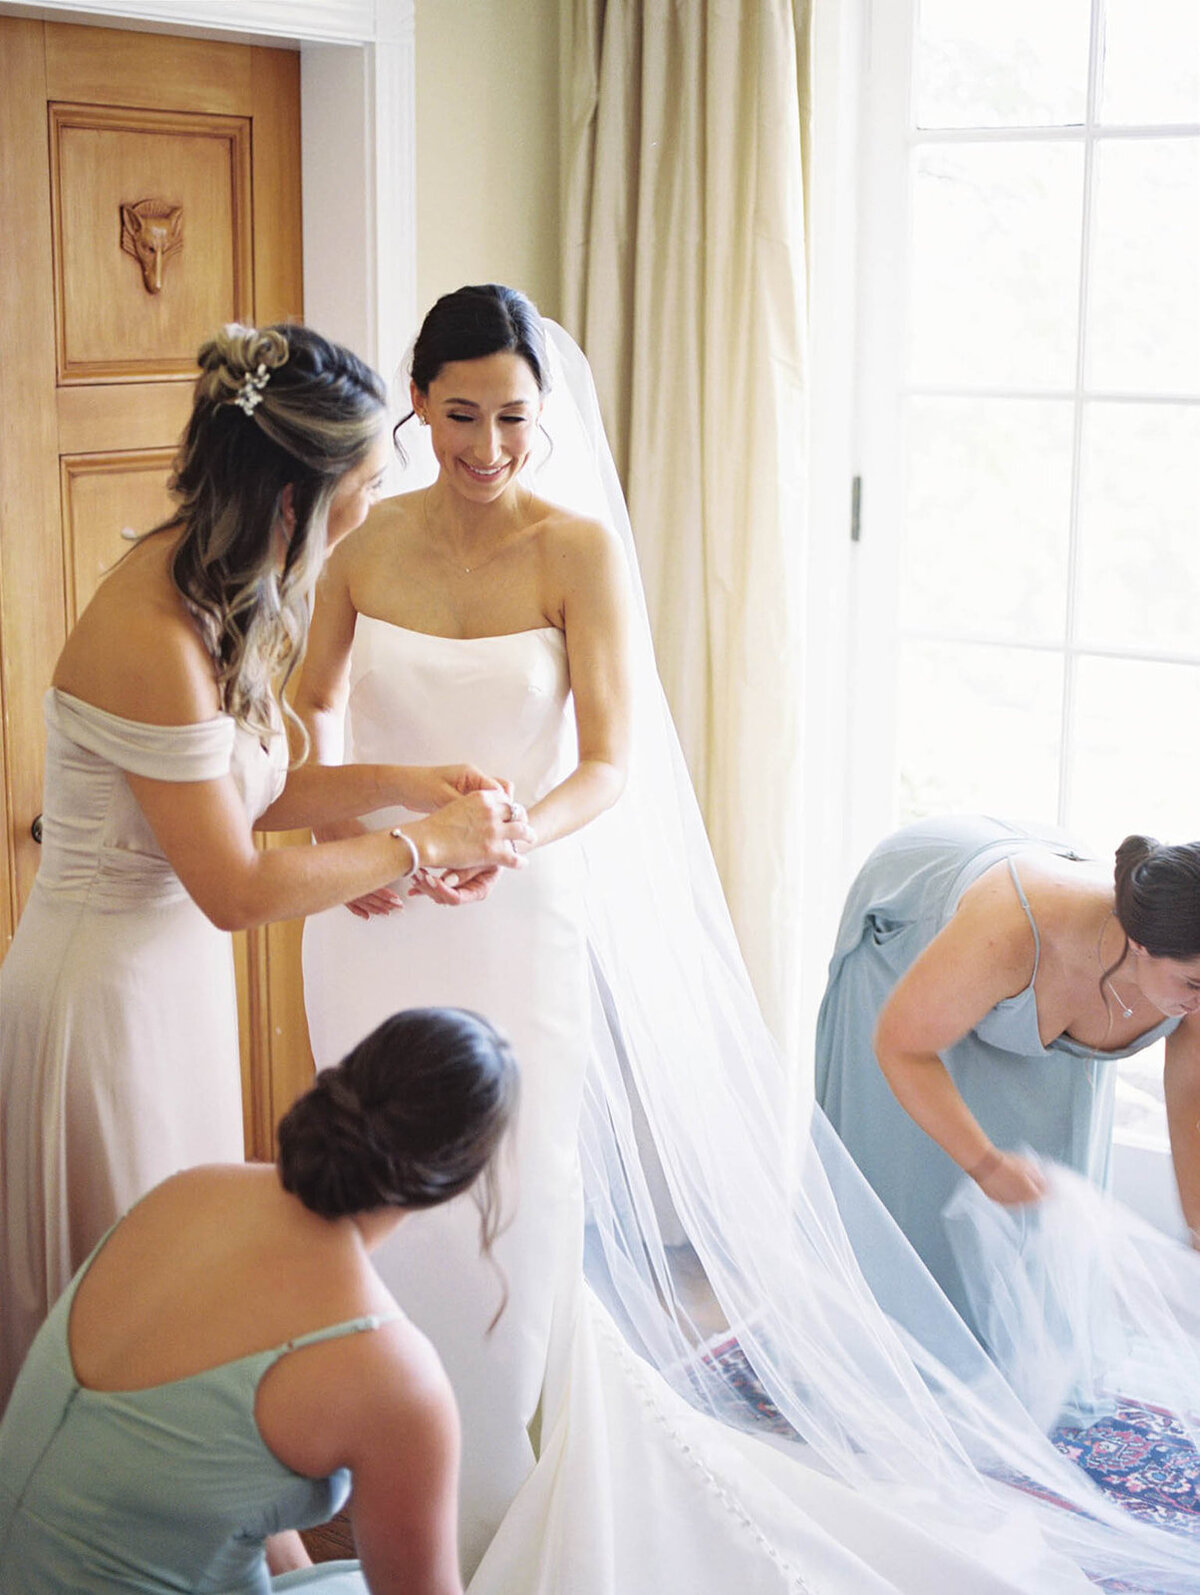 Bride getting ready with bridesmaids helping her